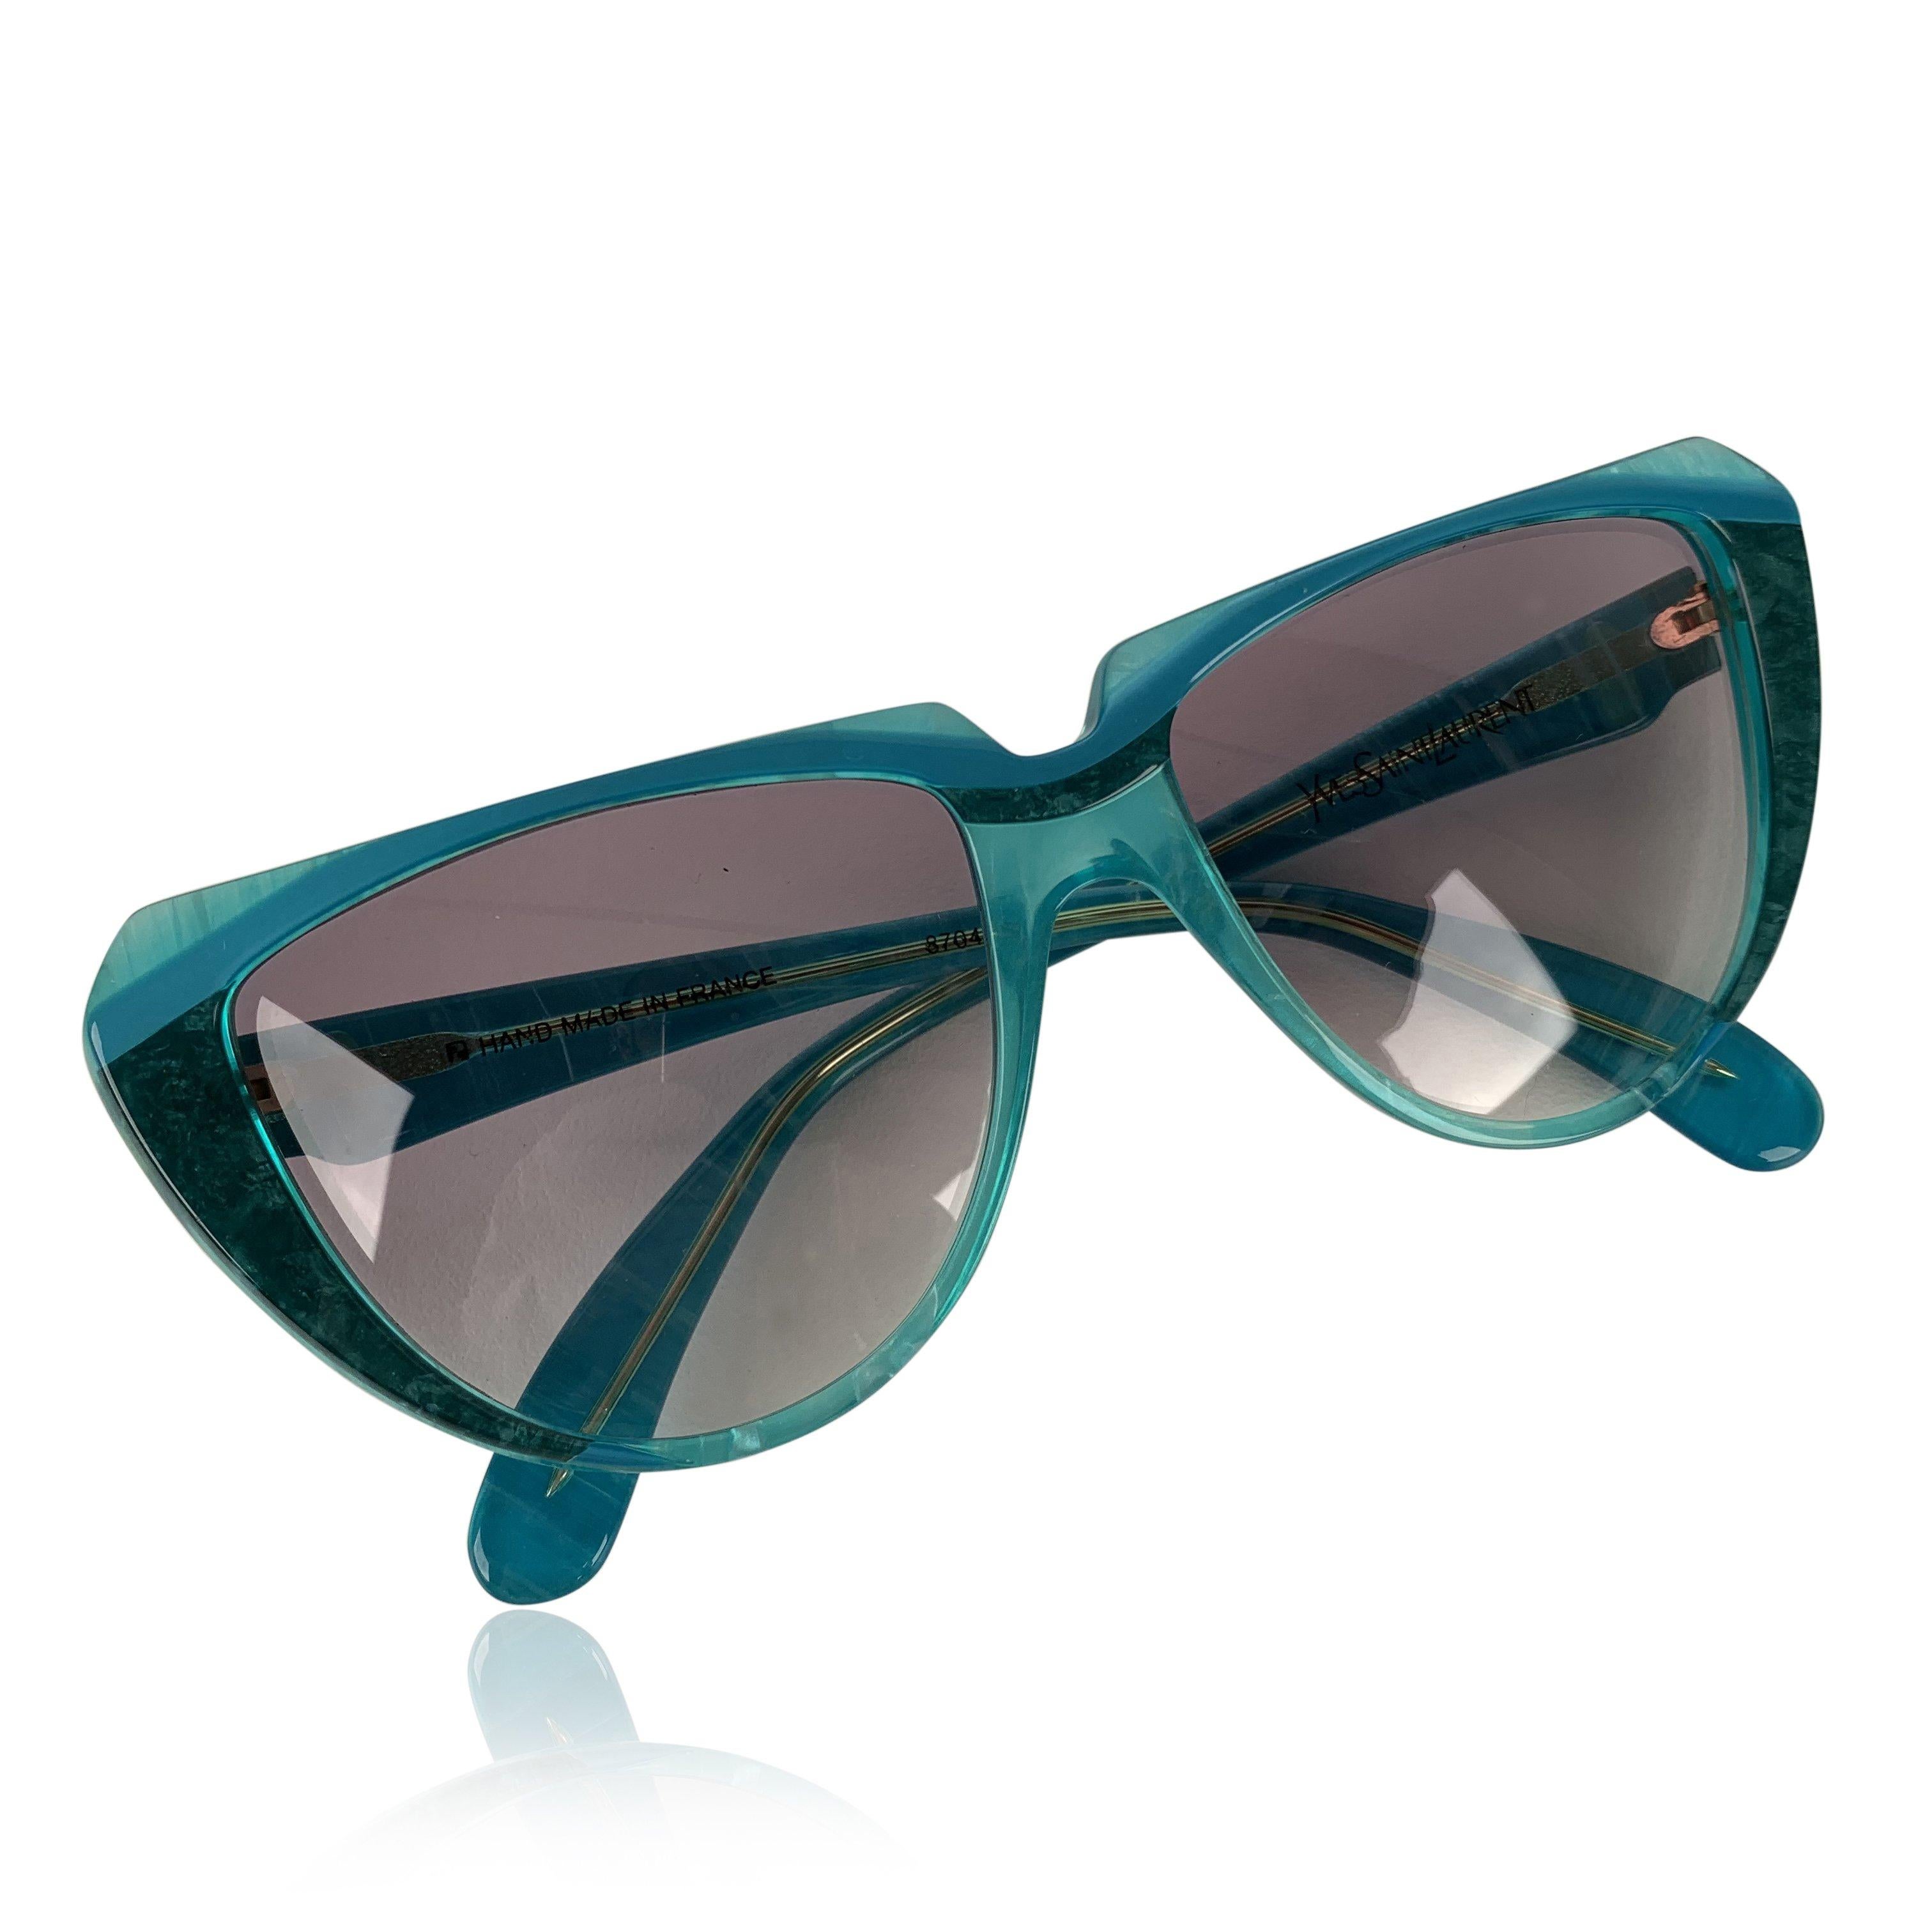 MATERIAL: Acetate COLOR: Turquoise MODEL: 8704 P 71 GENDER: Women SIZE: Medium COUNTRY OF MANUFACTURE: France Condition CONDITION DETAILS: NOS - New Old Stock - Never worn or Used - They will come with a GENERIC Case Measurements MEASUREMENTS: